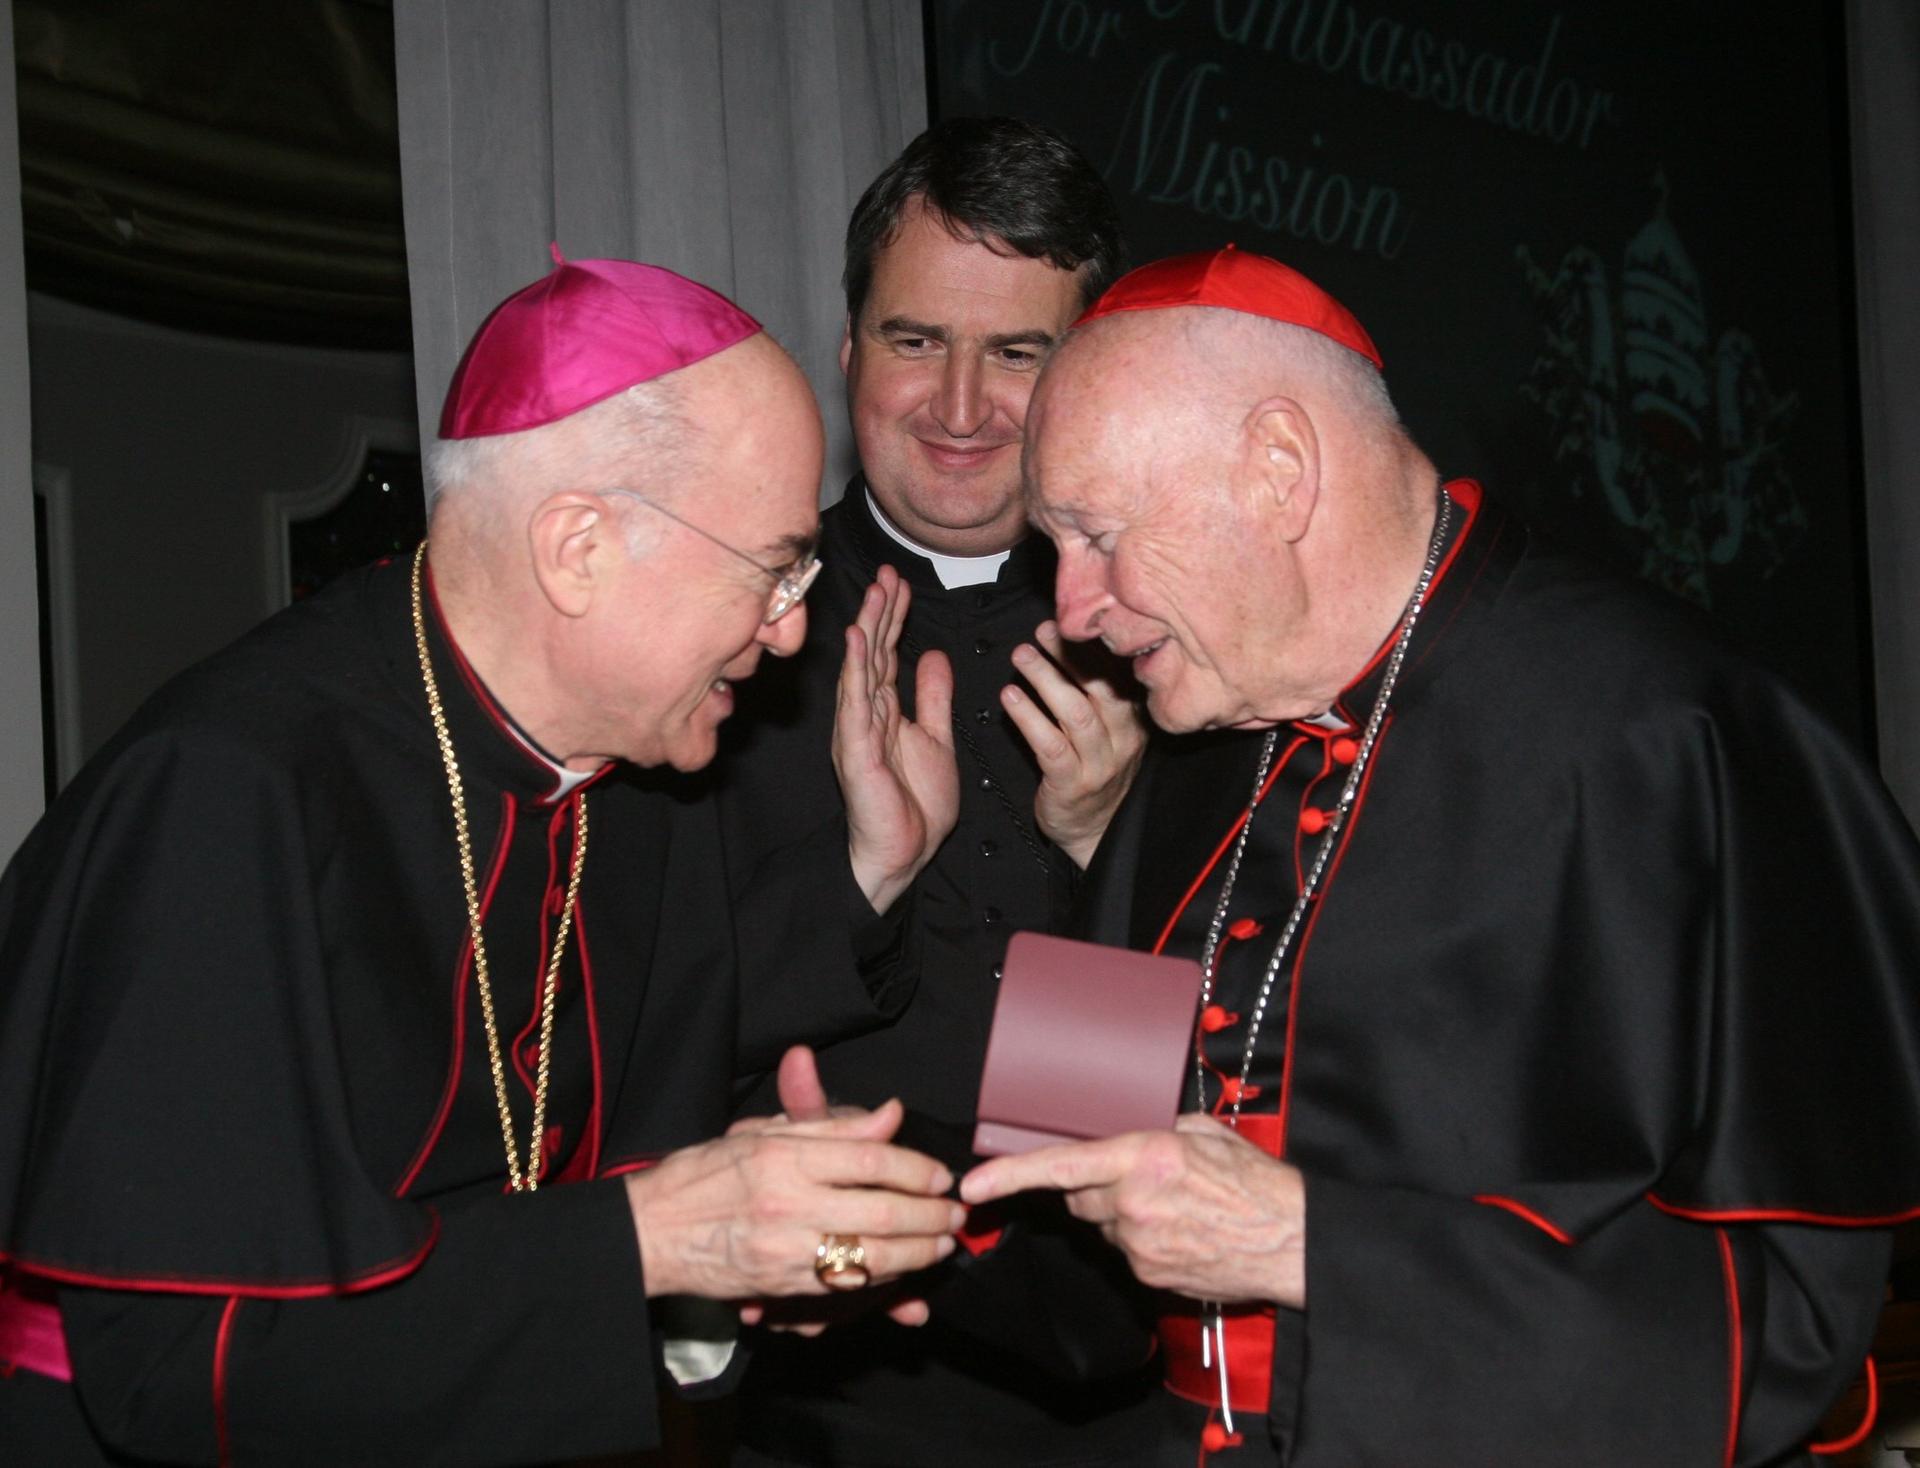 Victims ‘welcome’ McCarrick report, but say accountability needed